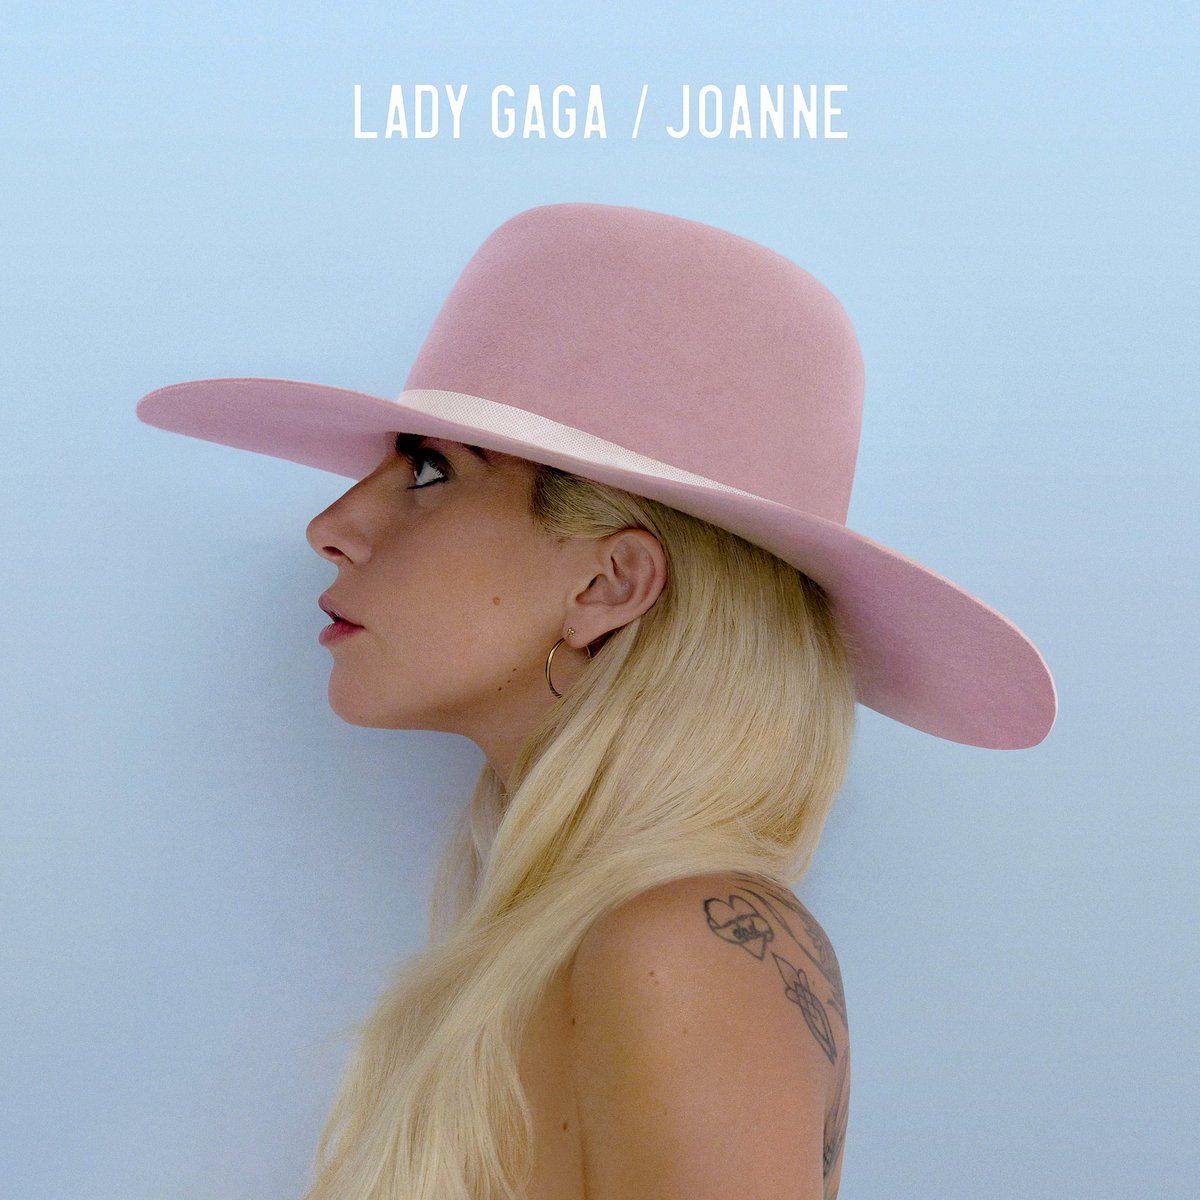 8 yrs ago, I wouldn’t even listen to it, but @ladygaga’s JOANNE is a great f*cking album. Why was I so unwilling to accept an artist’s inevitable experimentation & development? Just watched “Chromatica Ball.” It’s not as though she abandoned the groove or the gays! #lessonlearned